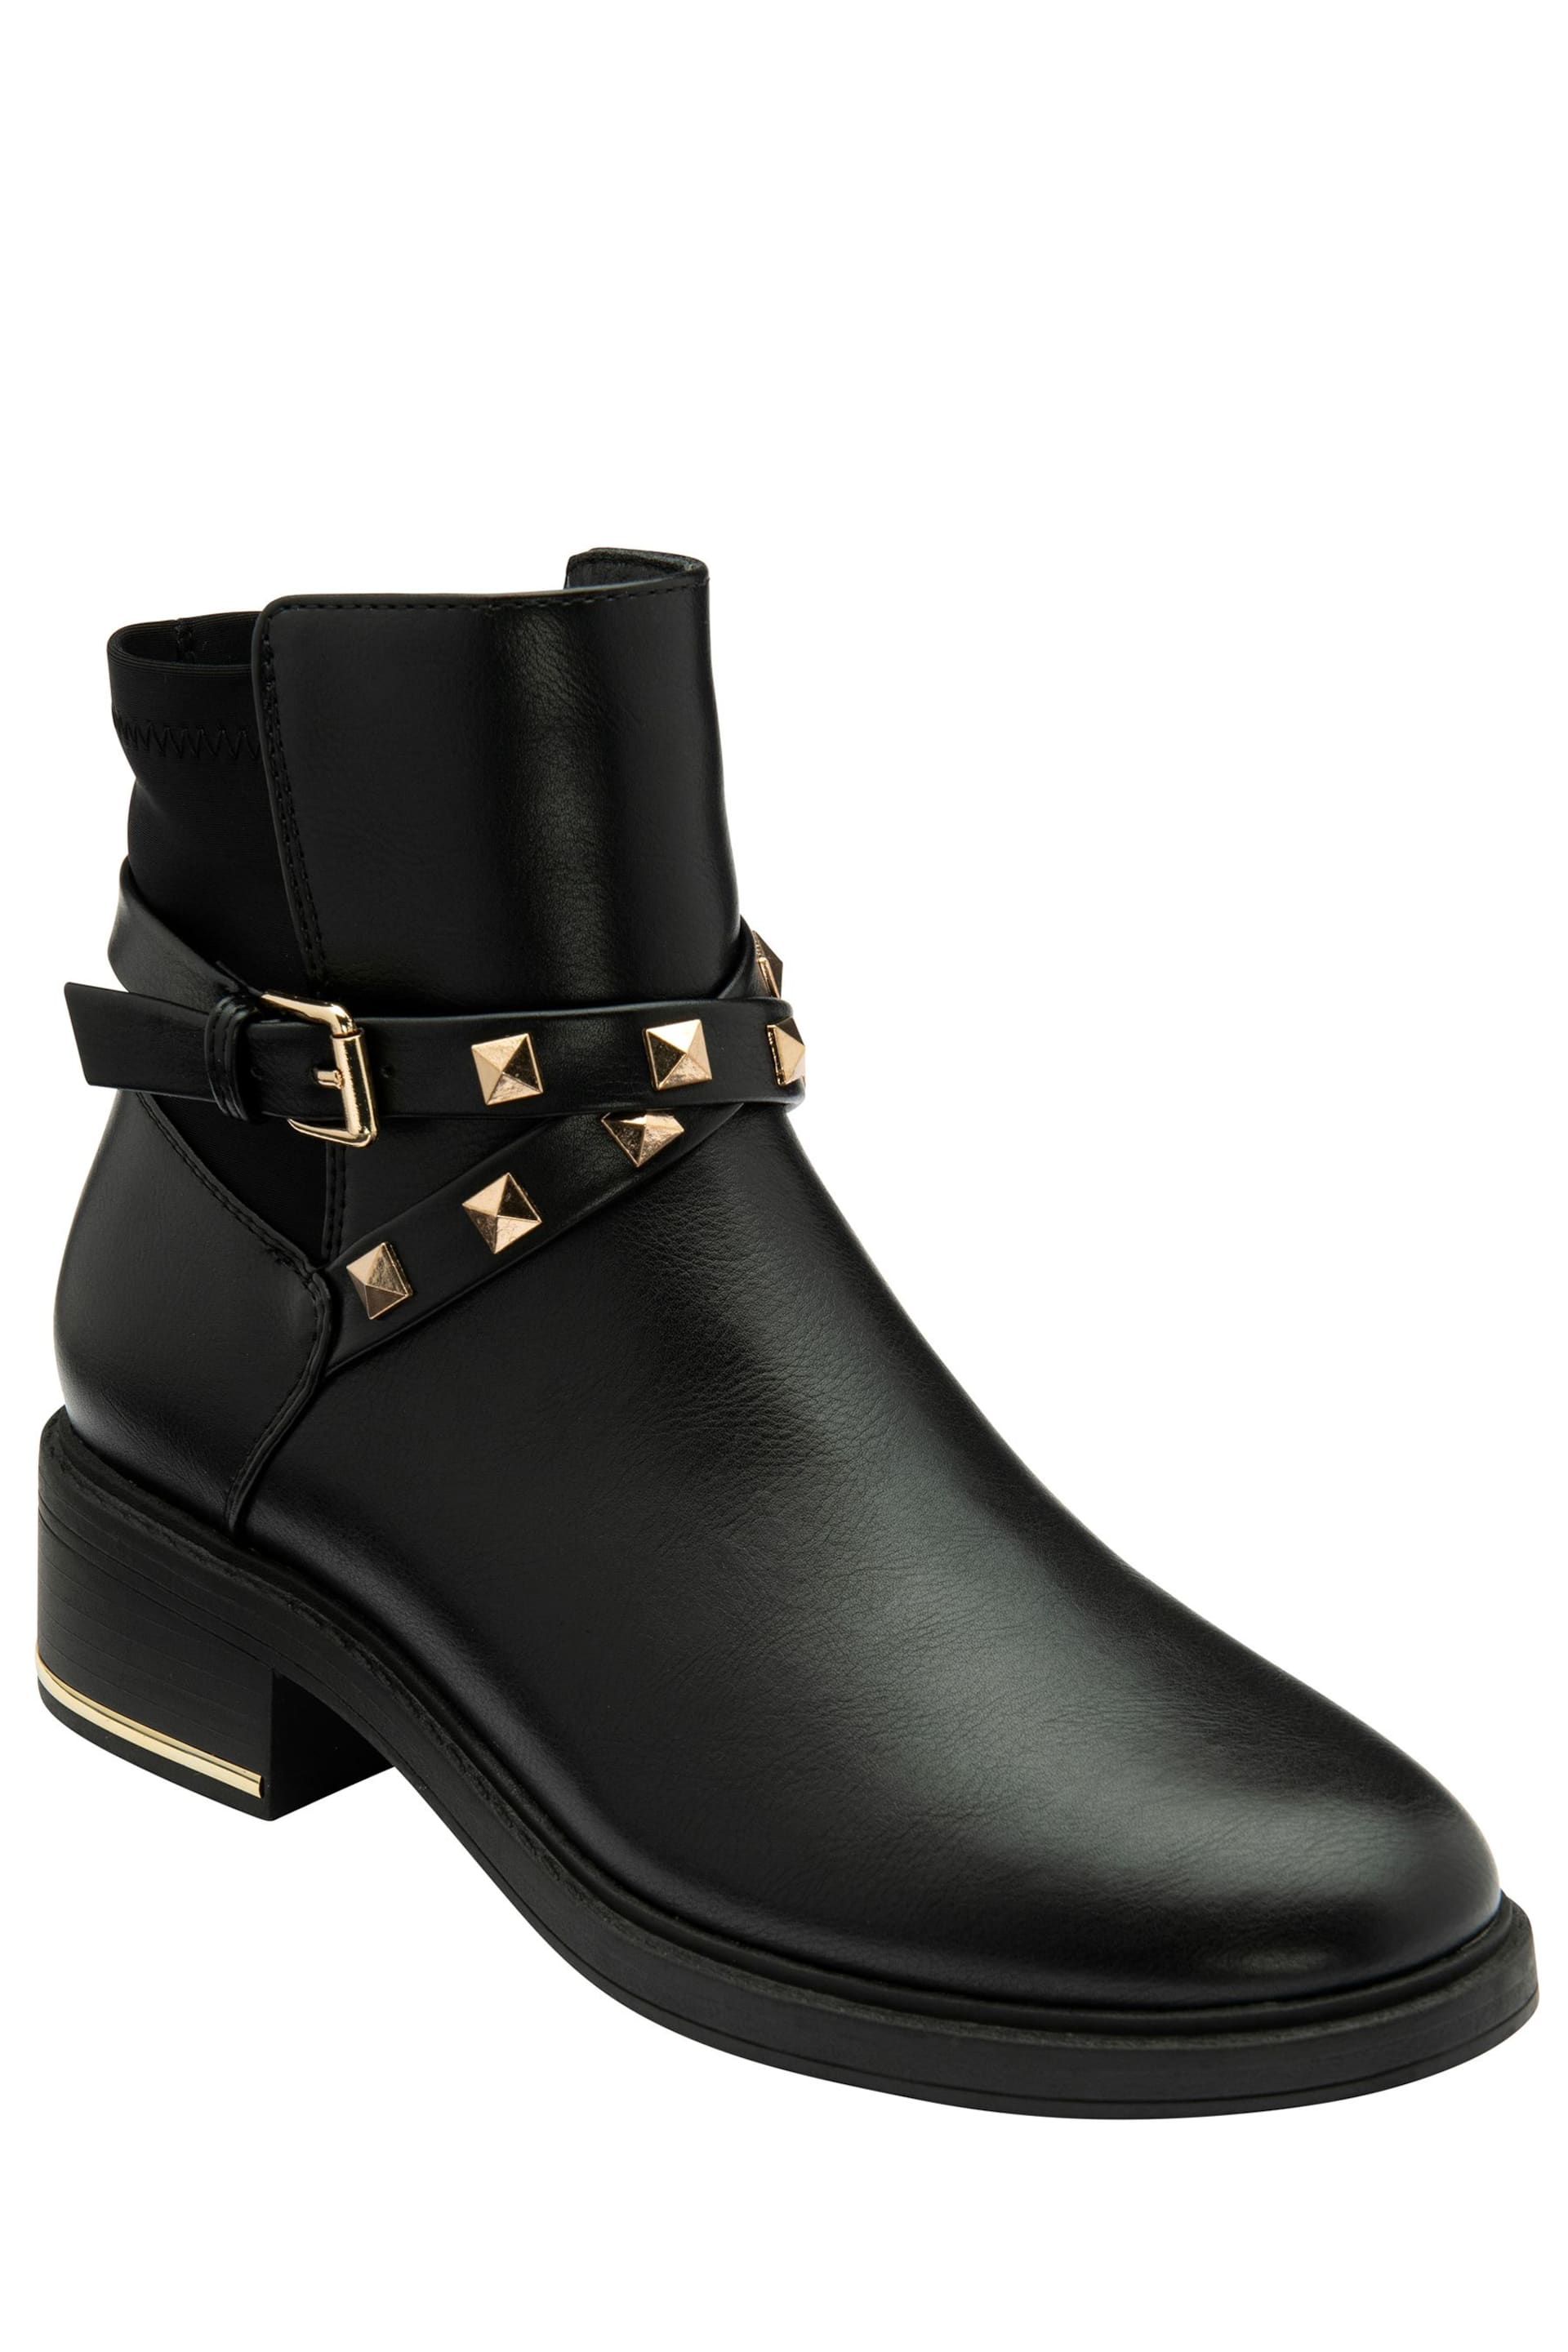 Lotus Black Gold Ankle Boots - Image 1 of 4